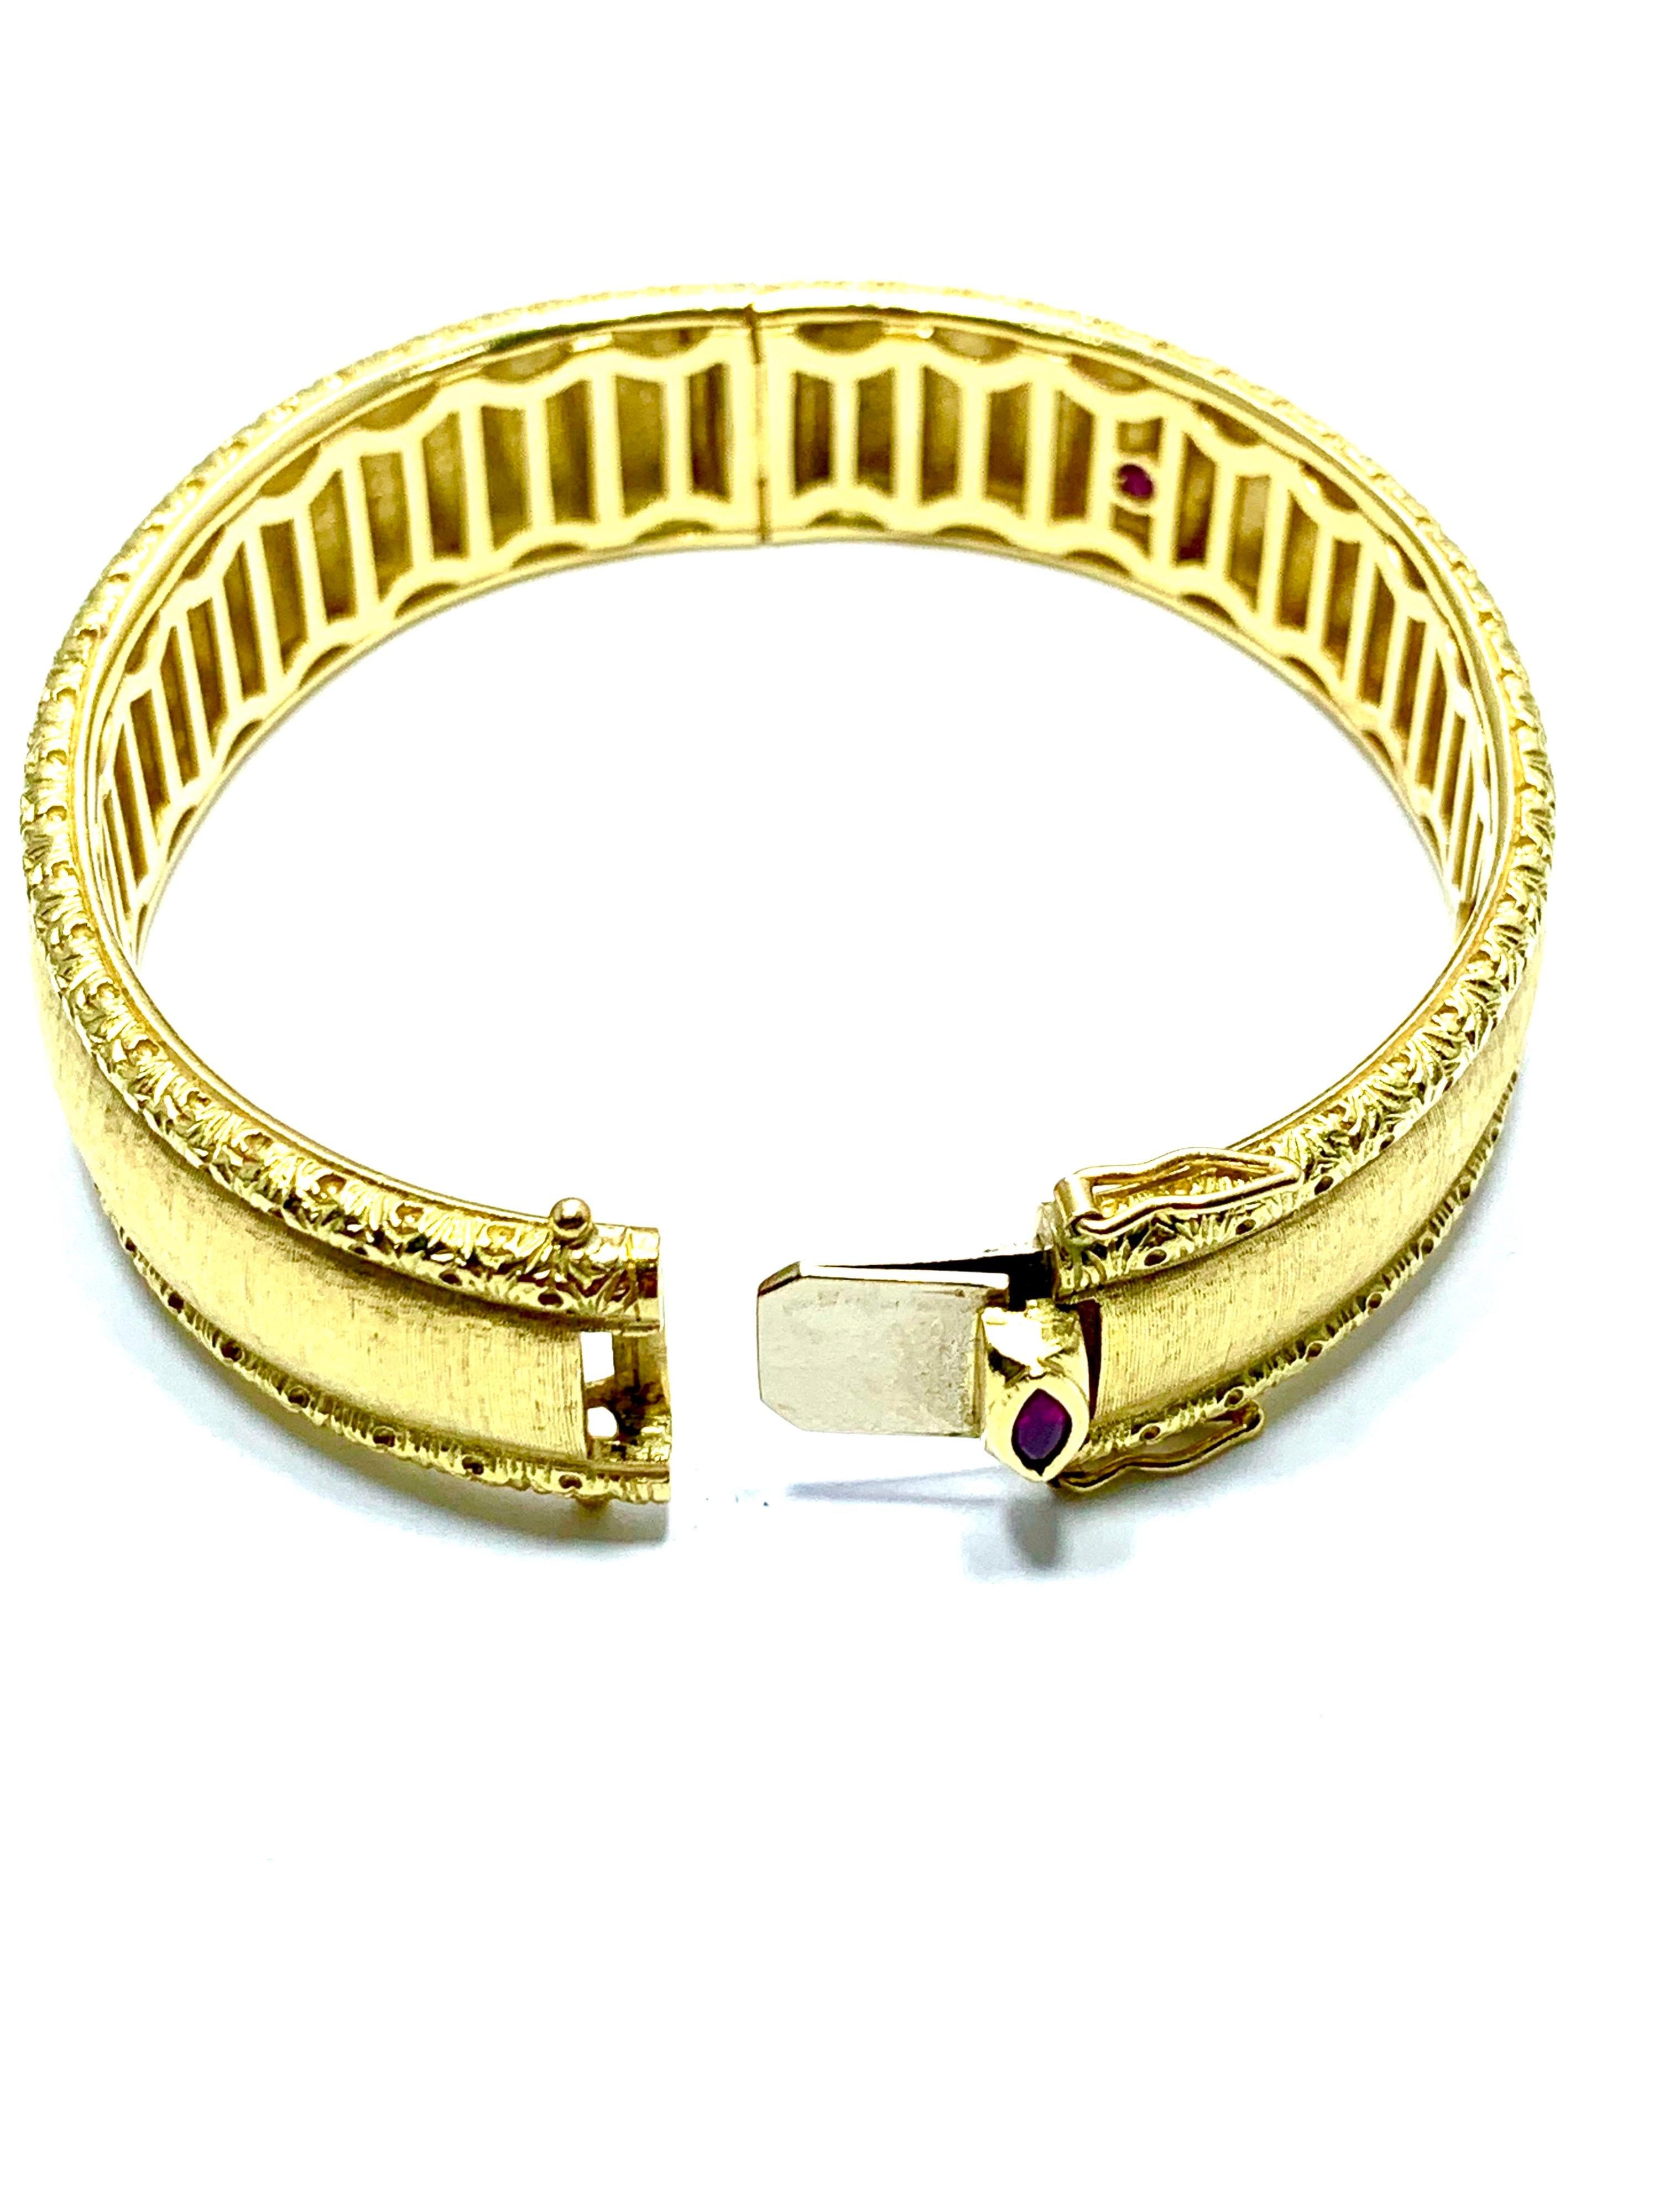 Women's or Men's Roberto Coin 18 Karat Yellow Gold Bangle Bracelet with a Ruby Clasp